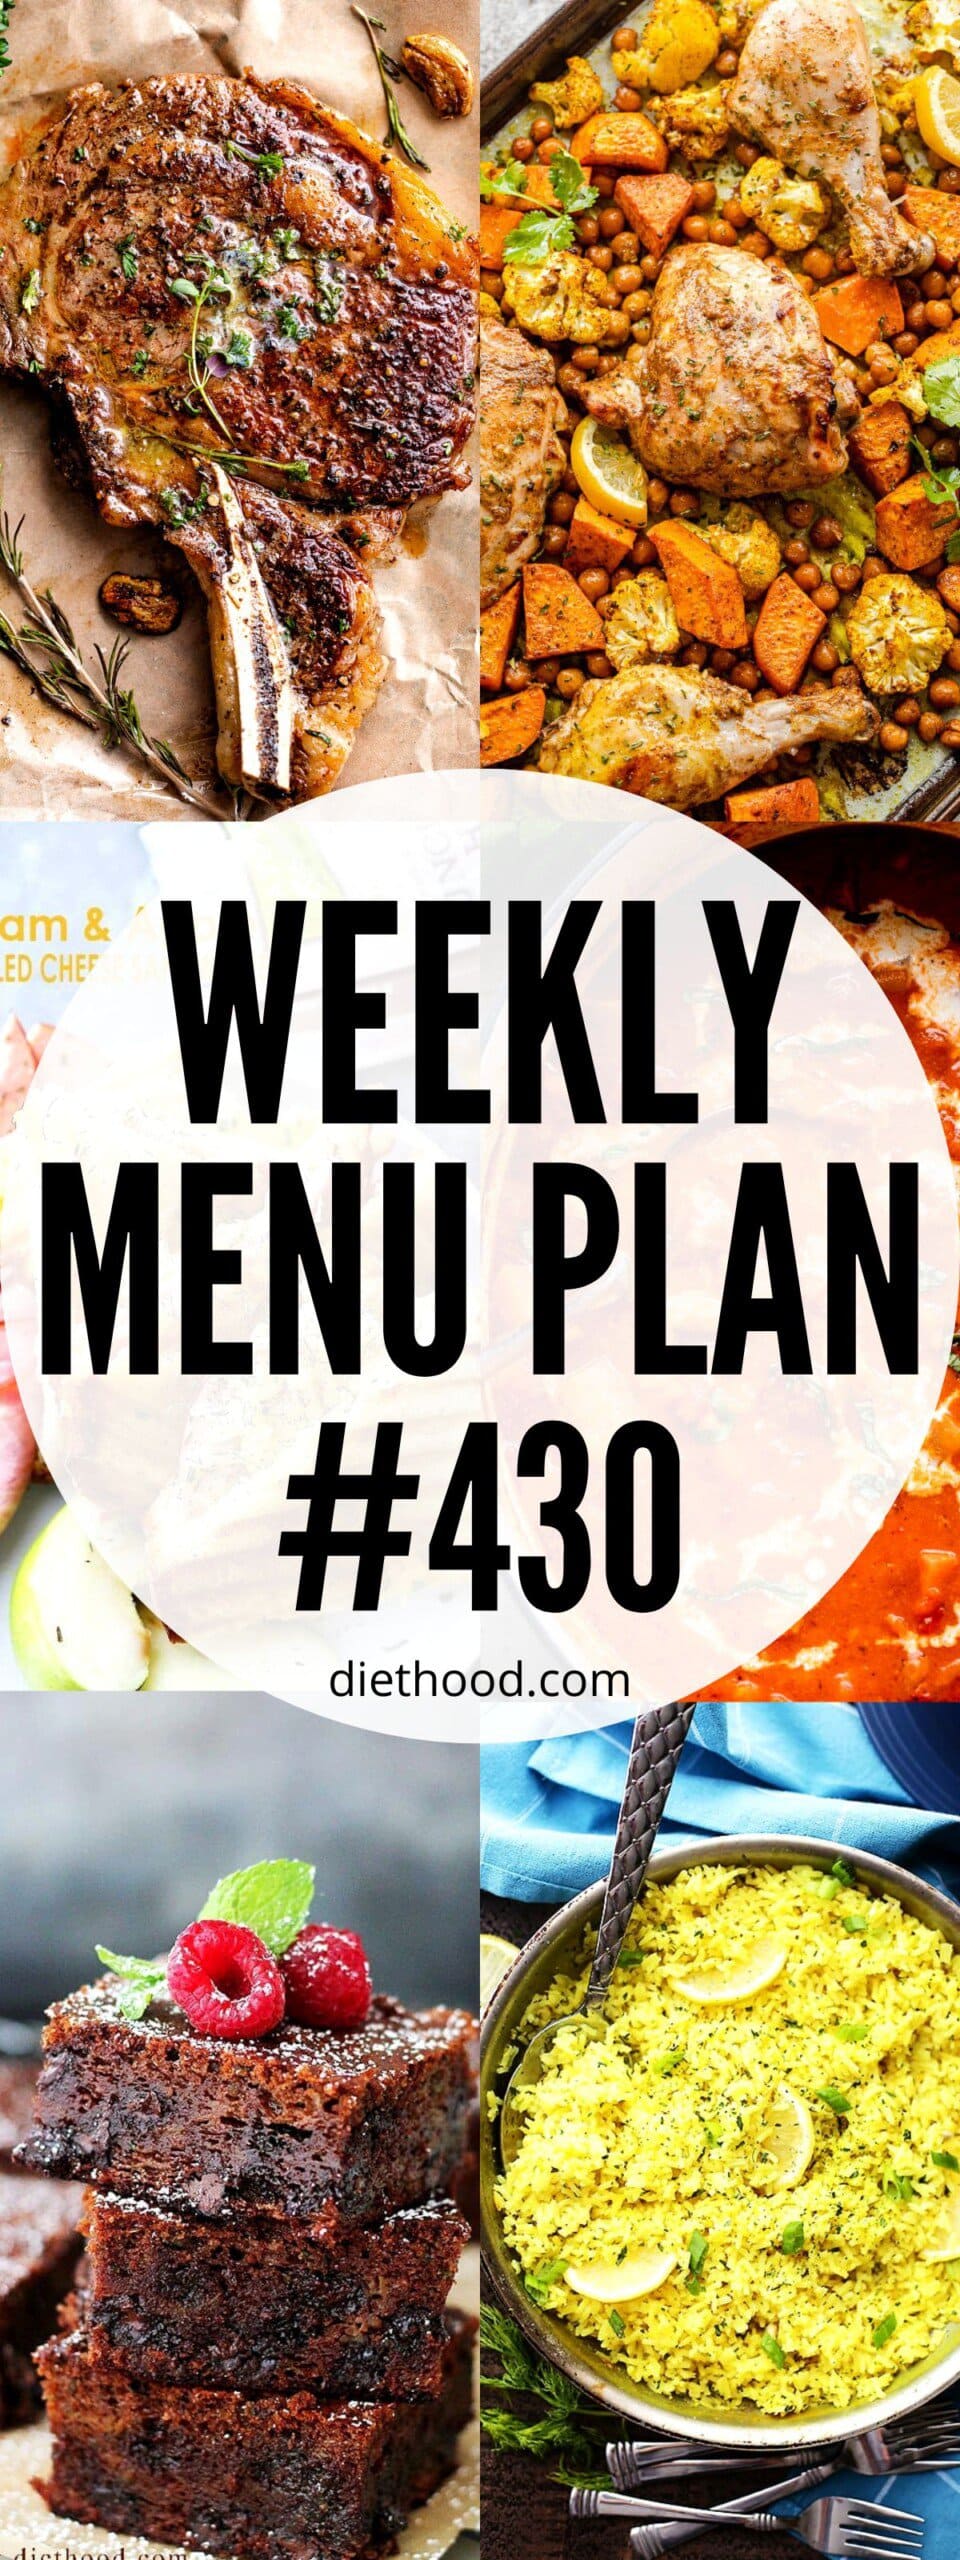 WEEKLY MENU PLAN 430 six pictures collage.